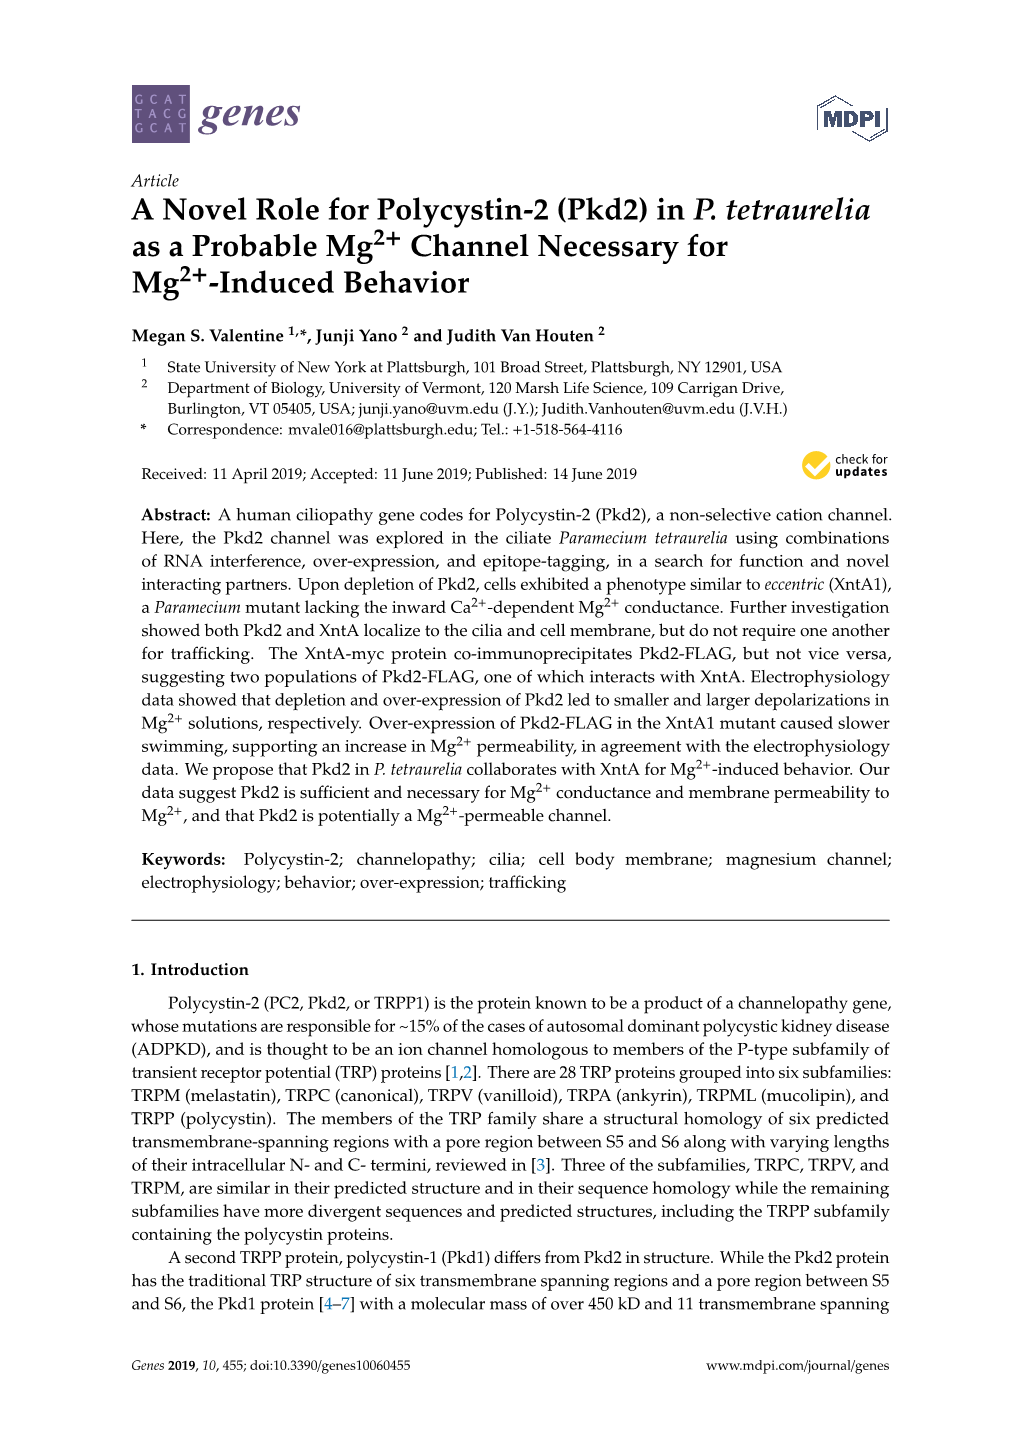 A Novel Role for Polycystin-2 (Pkd2) in P. Tetraurelia As a Probable Mg2+ Channel Necessary for Mg2+-Induced Behavior